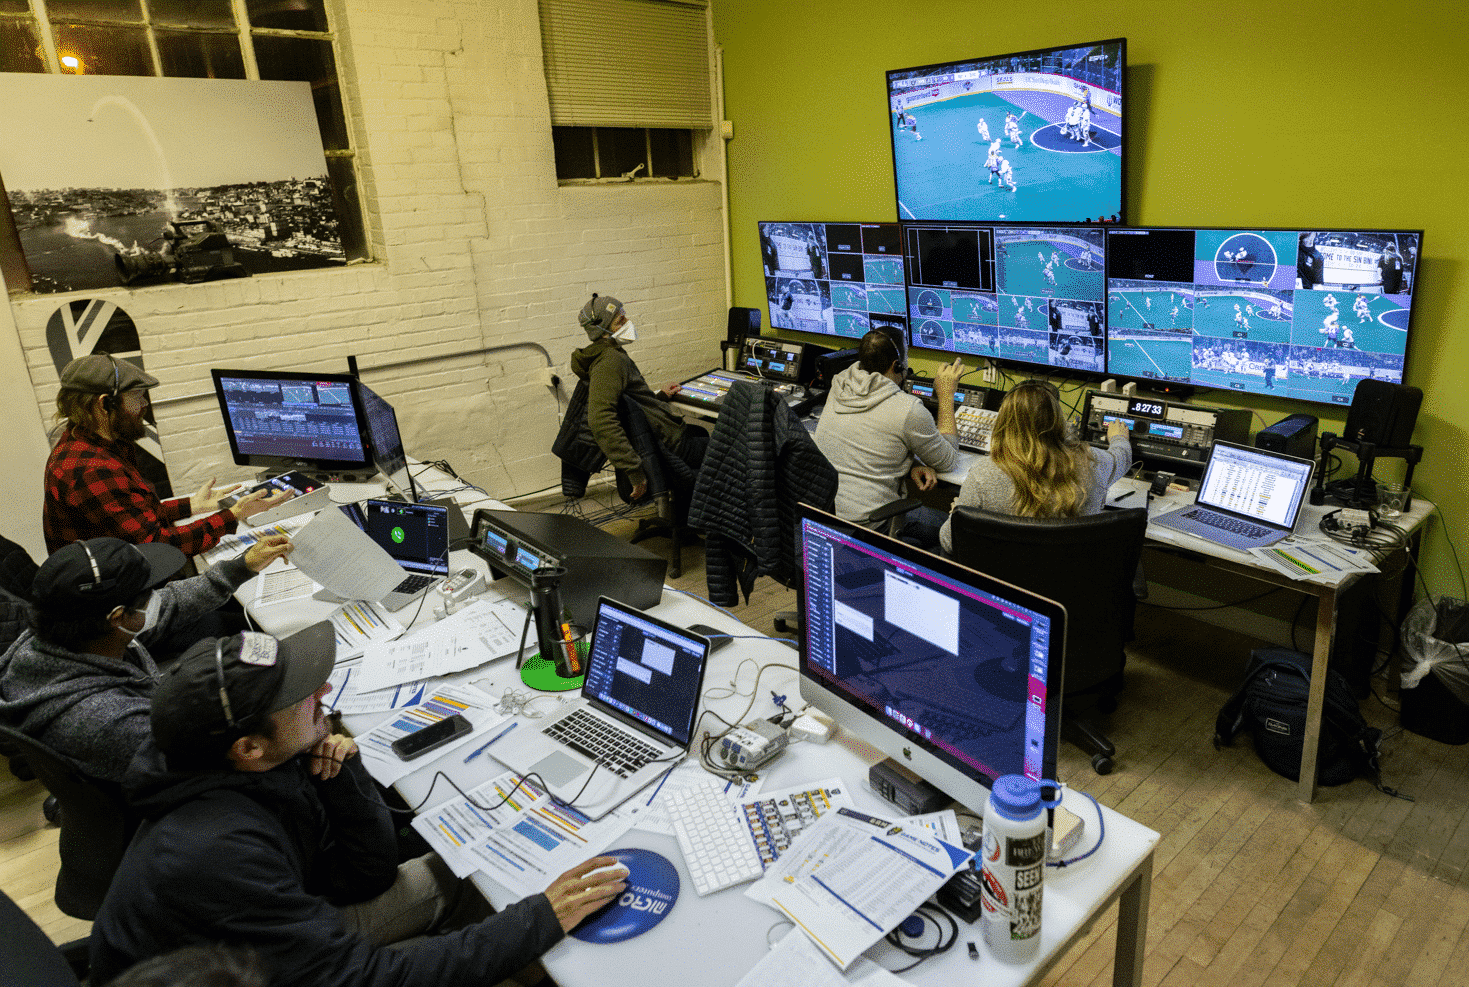 Niche sports, niche tools: The US National Lacrosse League uses Flowics in its broadcasts. The operator in front is creating match graphics using Flowics